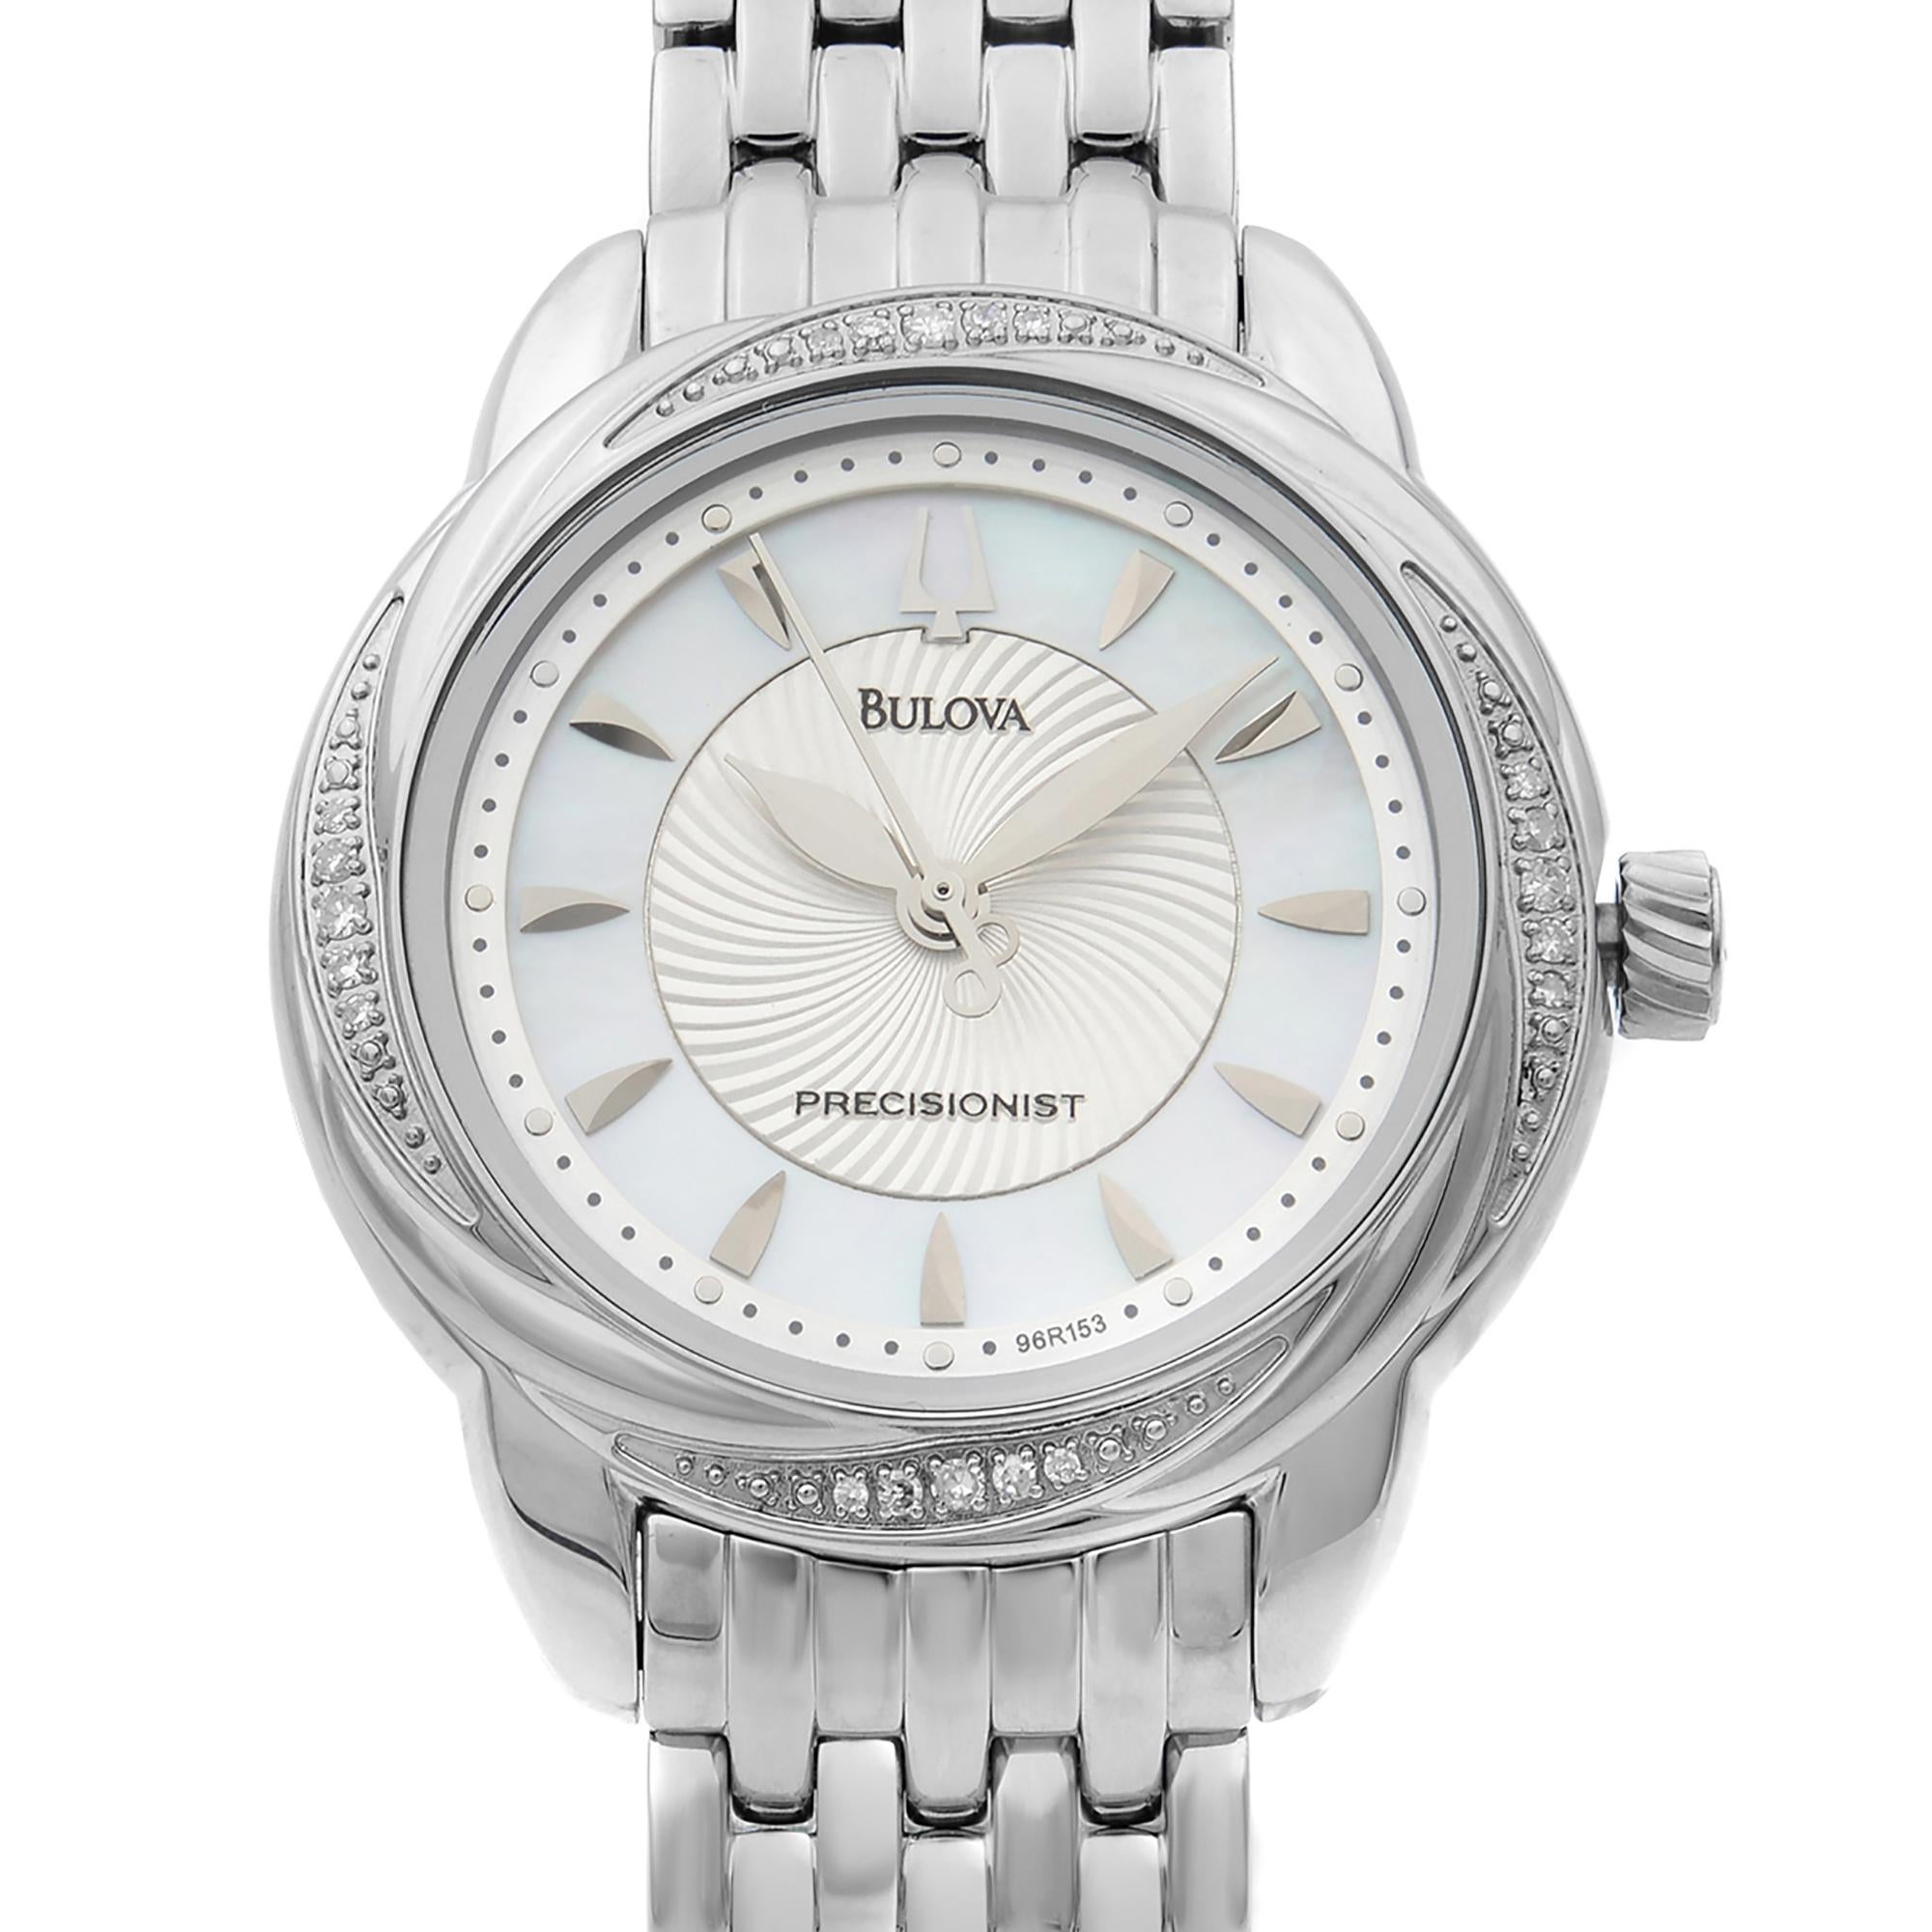 This pre-owned Bulova 96R153 Watch is a beautiful women's timepiece that is powered by quartz (battery) movement which is cased in a stainless steel case. It has a round shape face. Fixed stainless steel bezel set with 20 diamonds. Mother of pearl